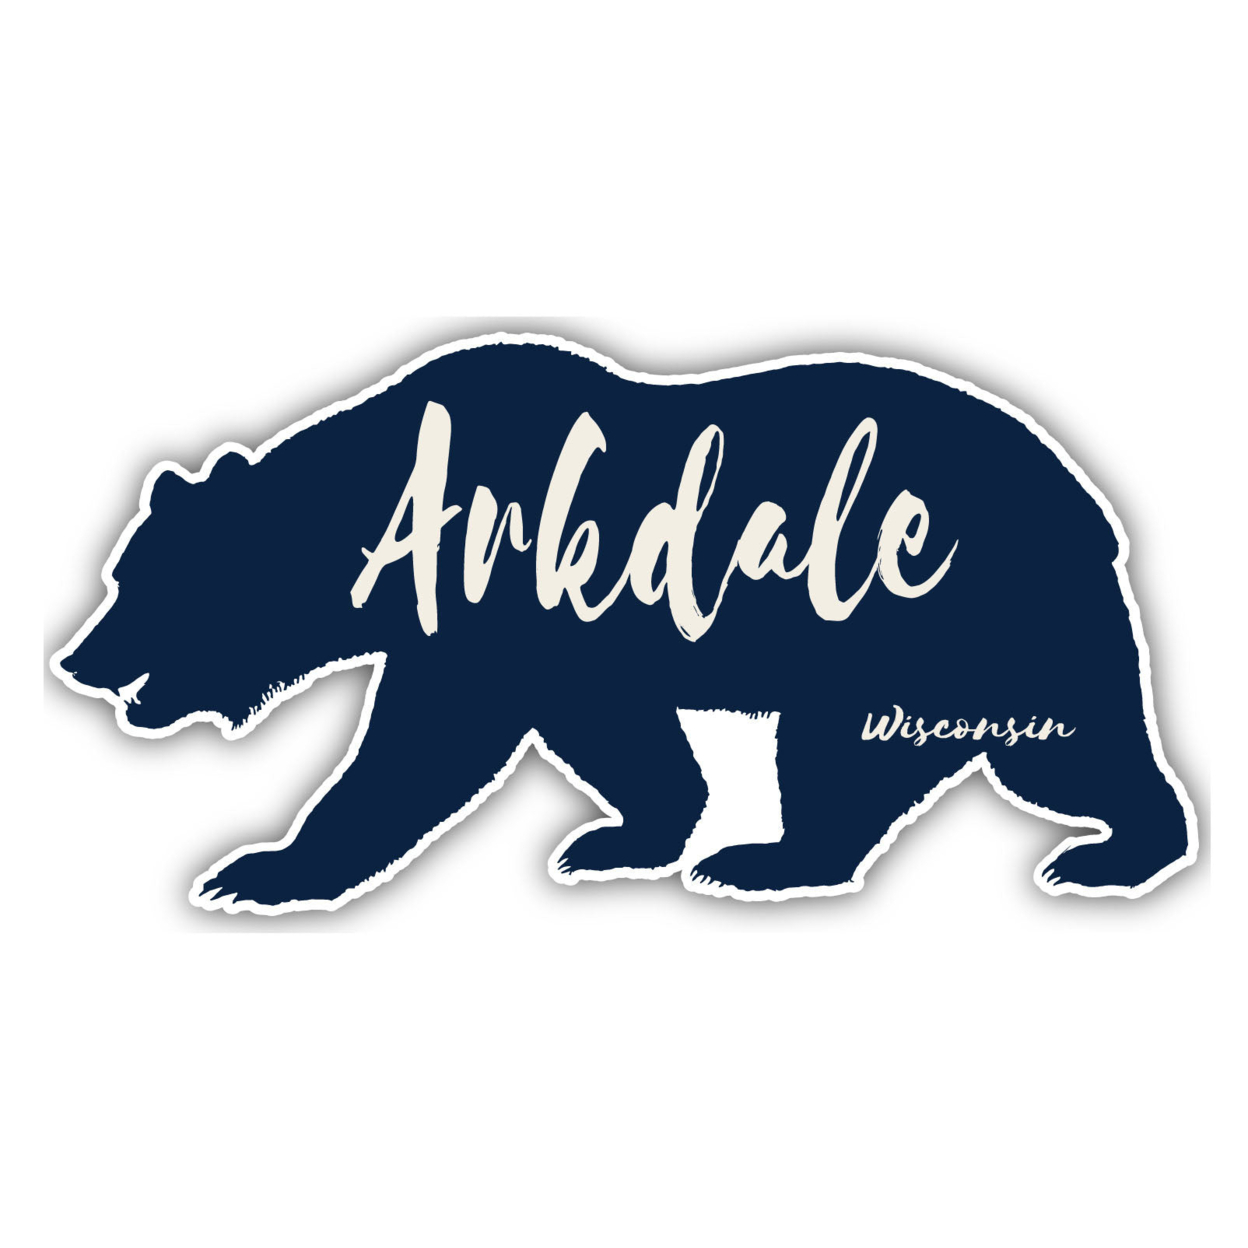 Arkdale Wisconsin Souvenir Decorative Stickers (Choose Theme And Size) - Single Unit, 6-Inch, Tent